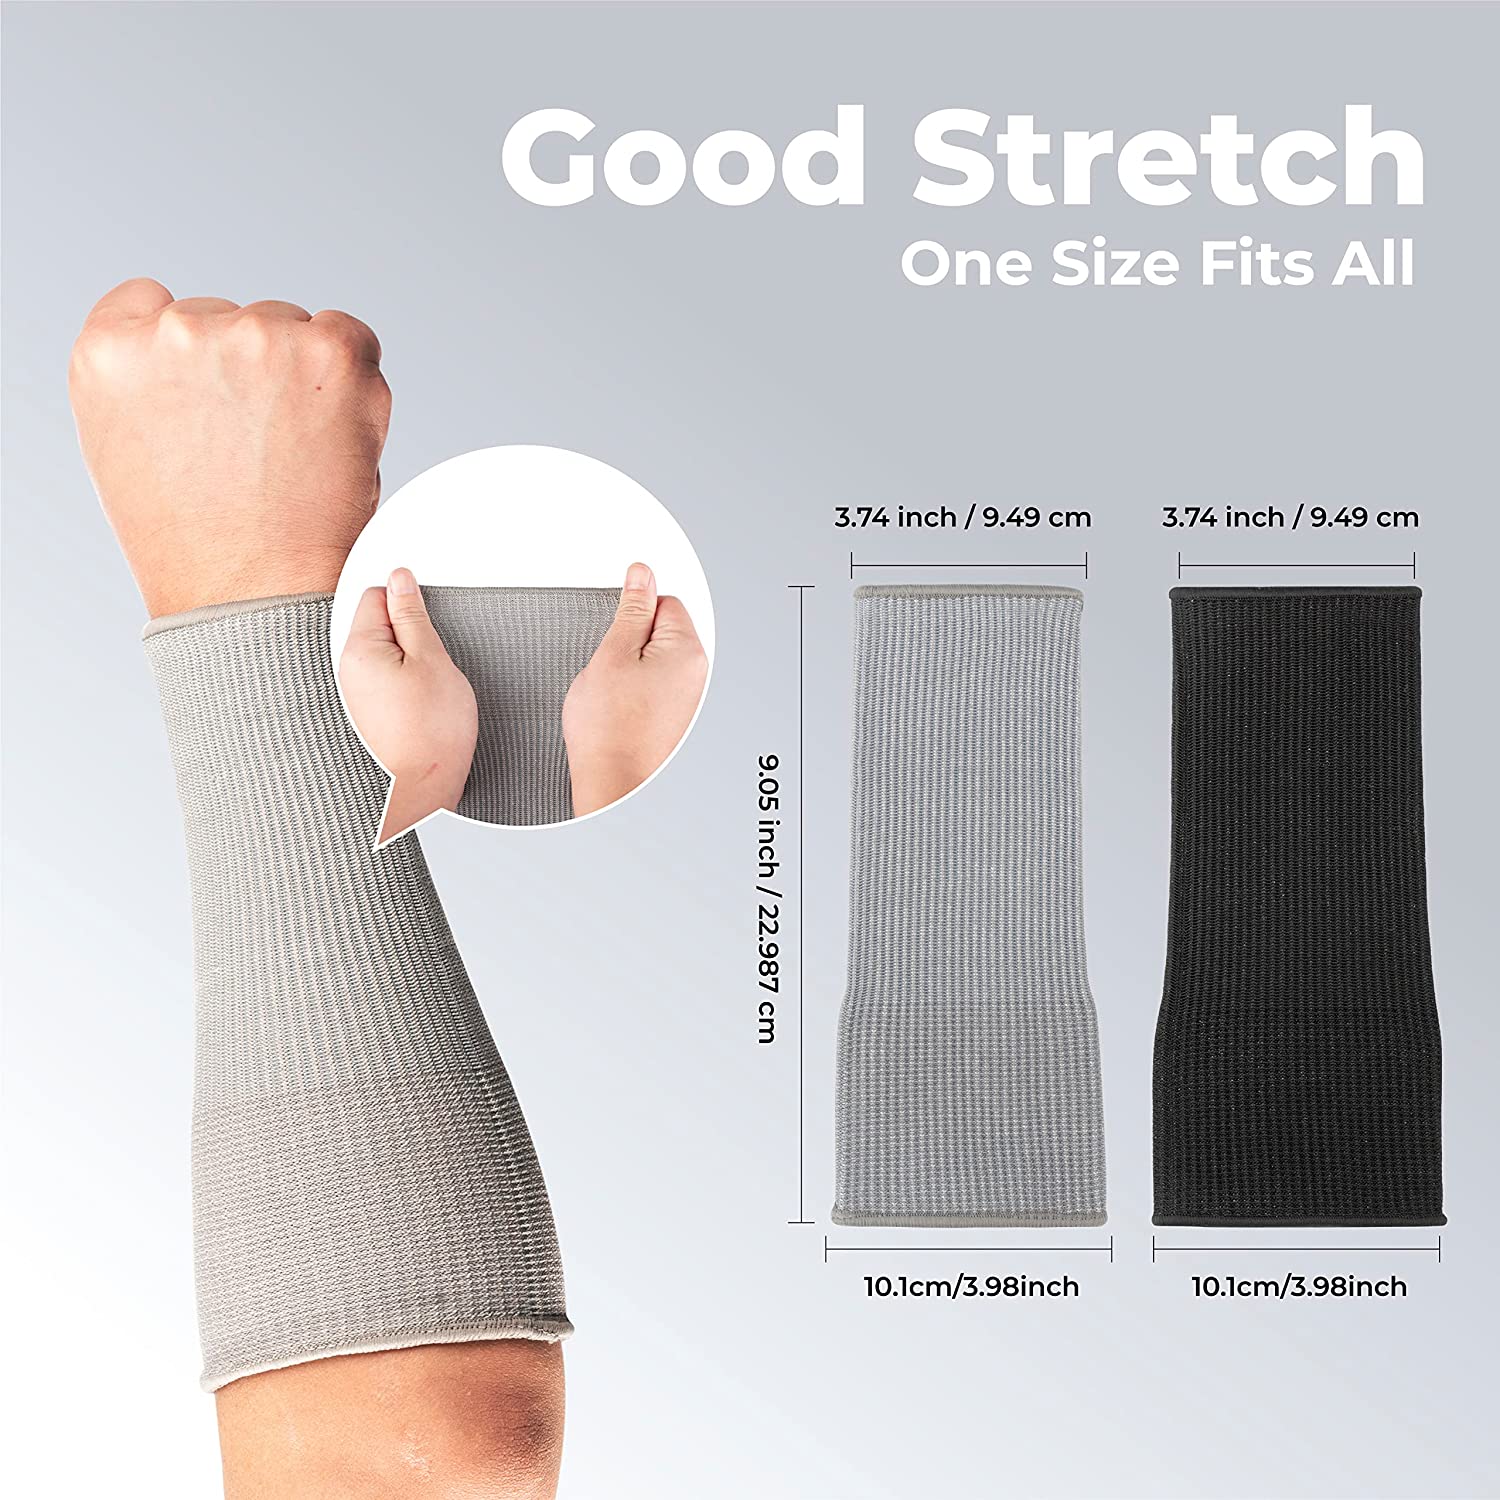 Limbkeepers Lightweight Protective Arm Sleeves : protect fragile skin